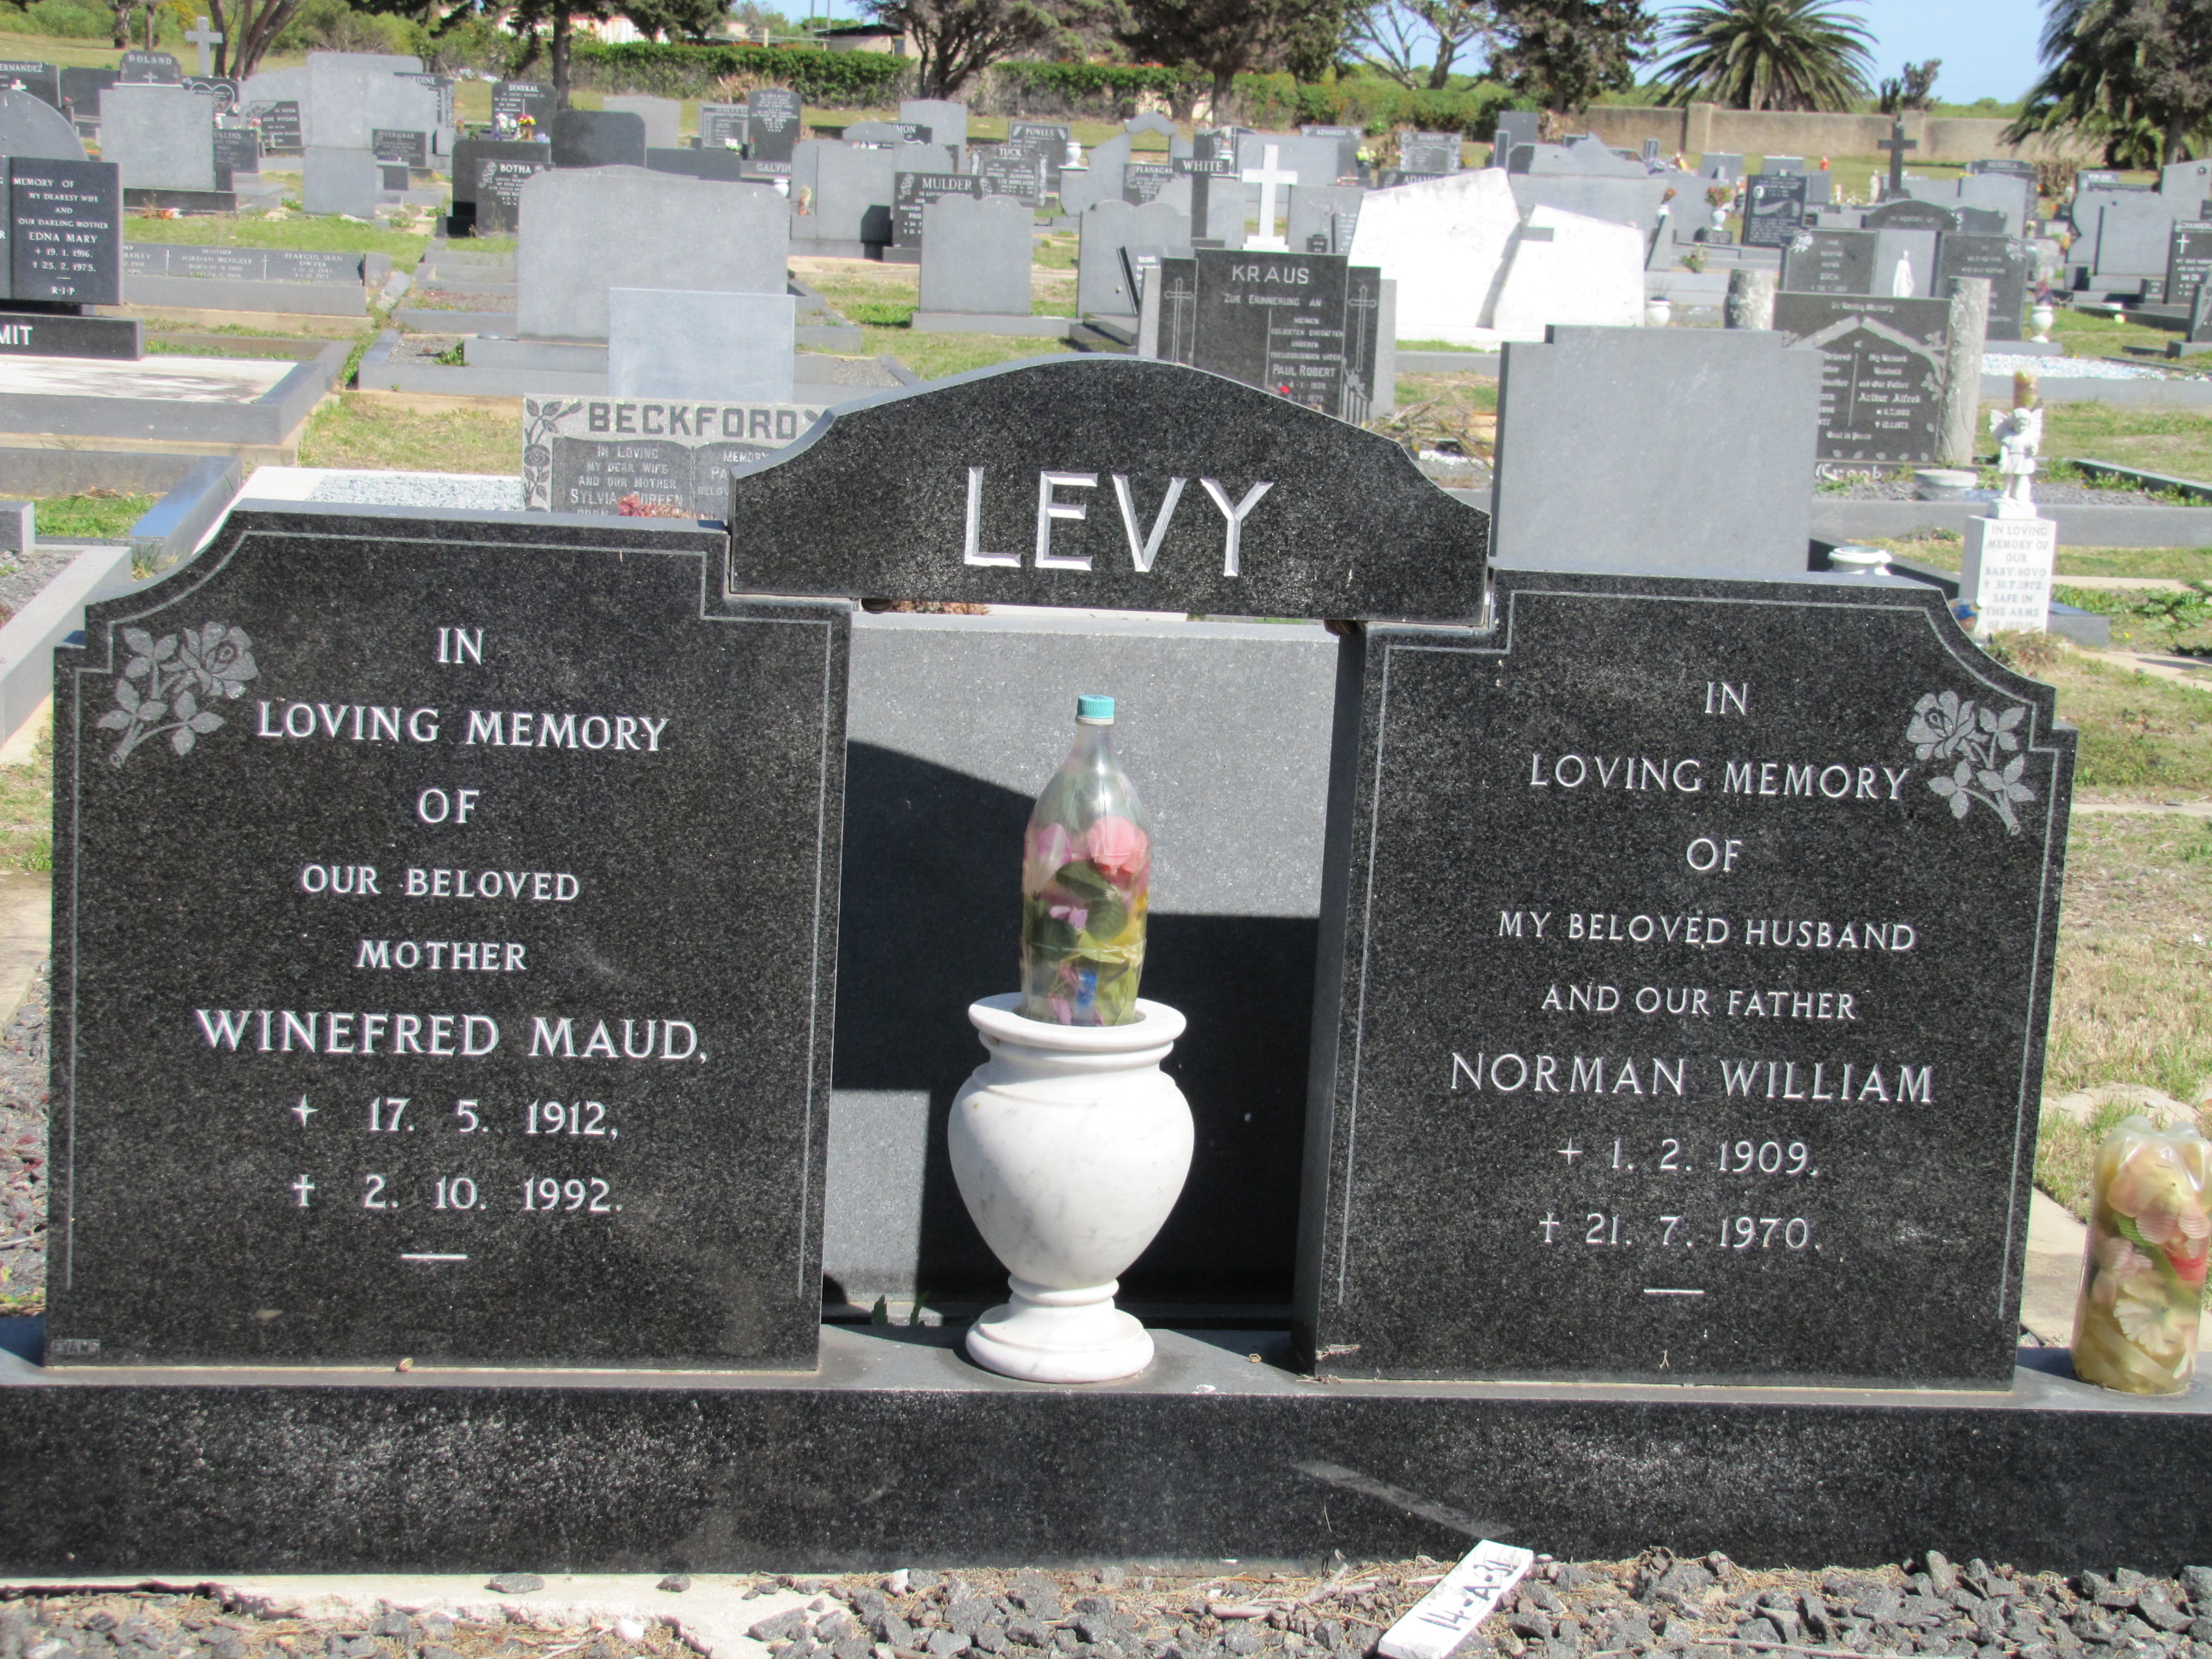 LEVY Norman William 1909-1970 & Winefred Maud 1912-1992